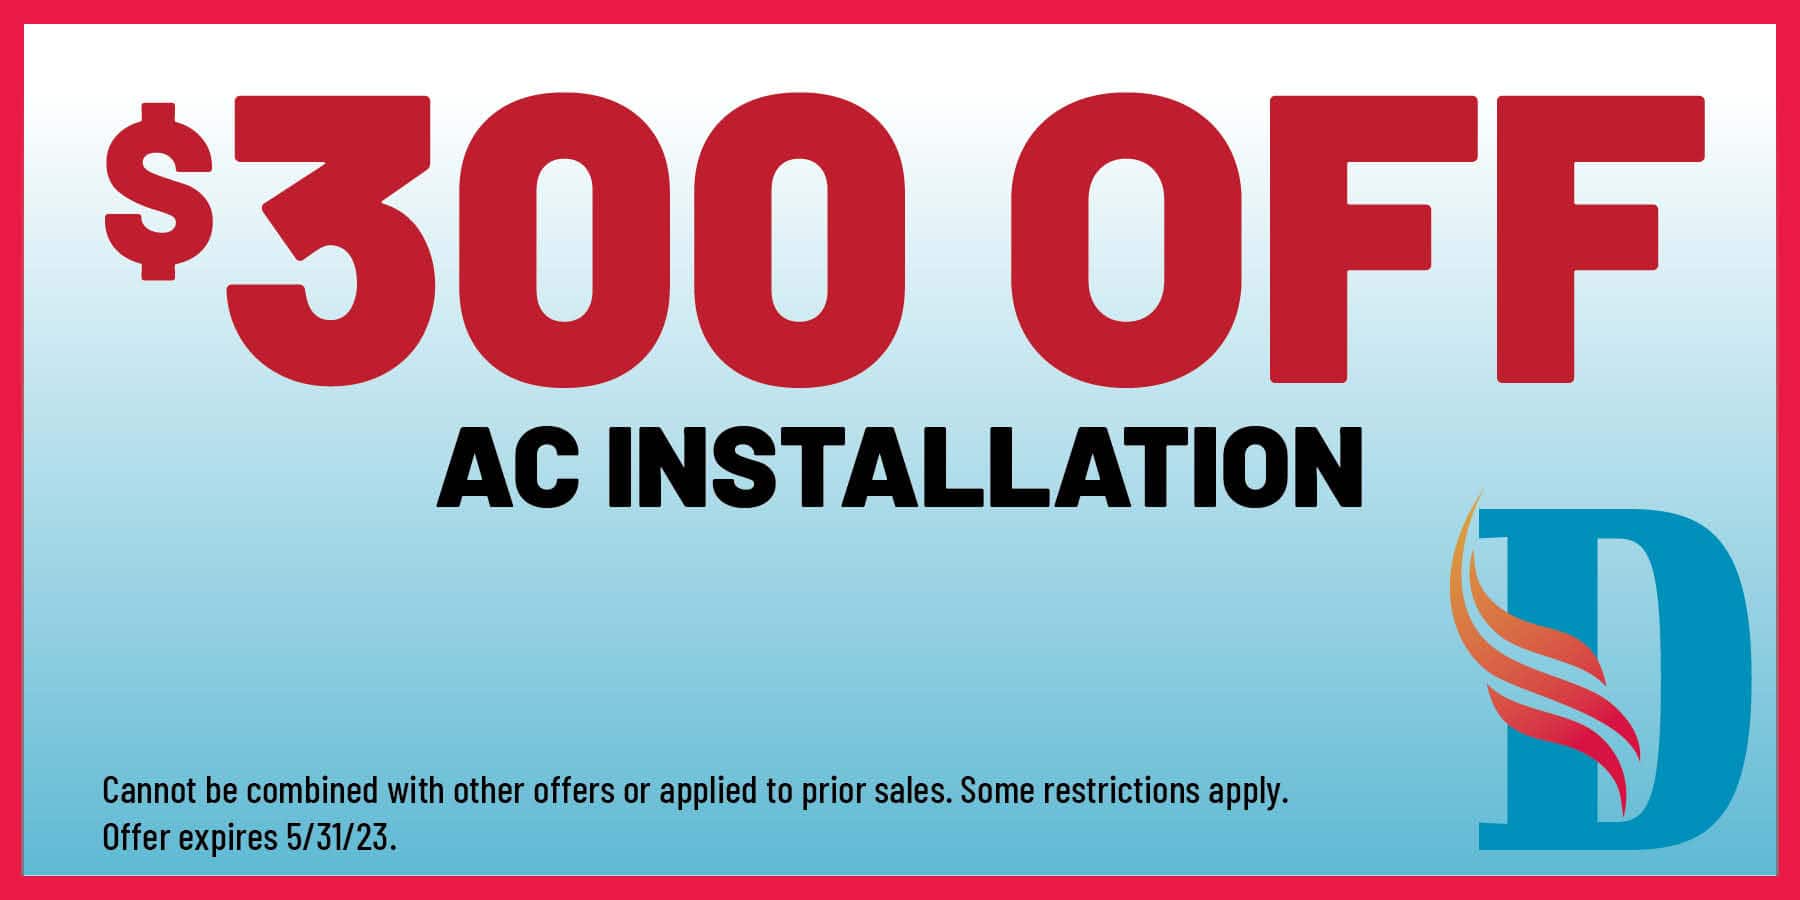 0 off ac installation coupon.